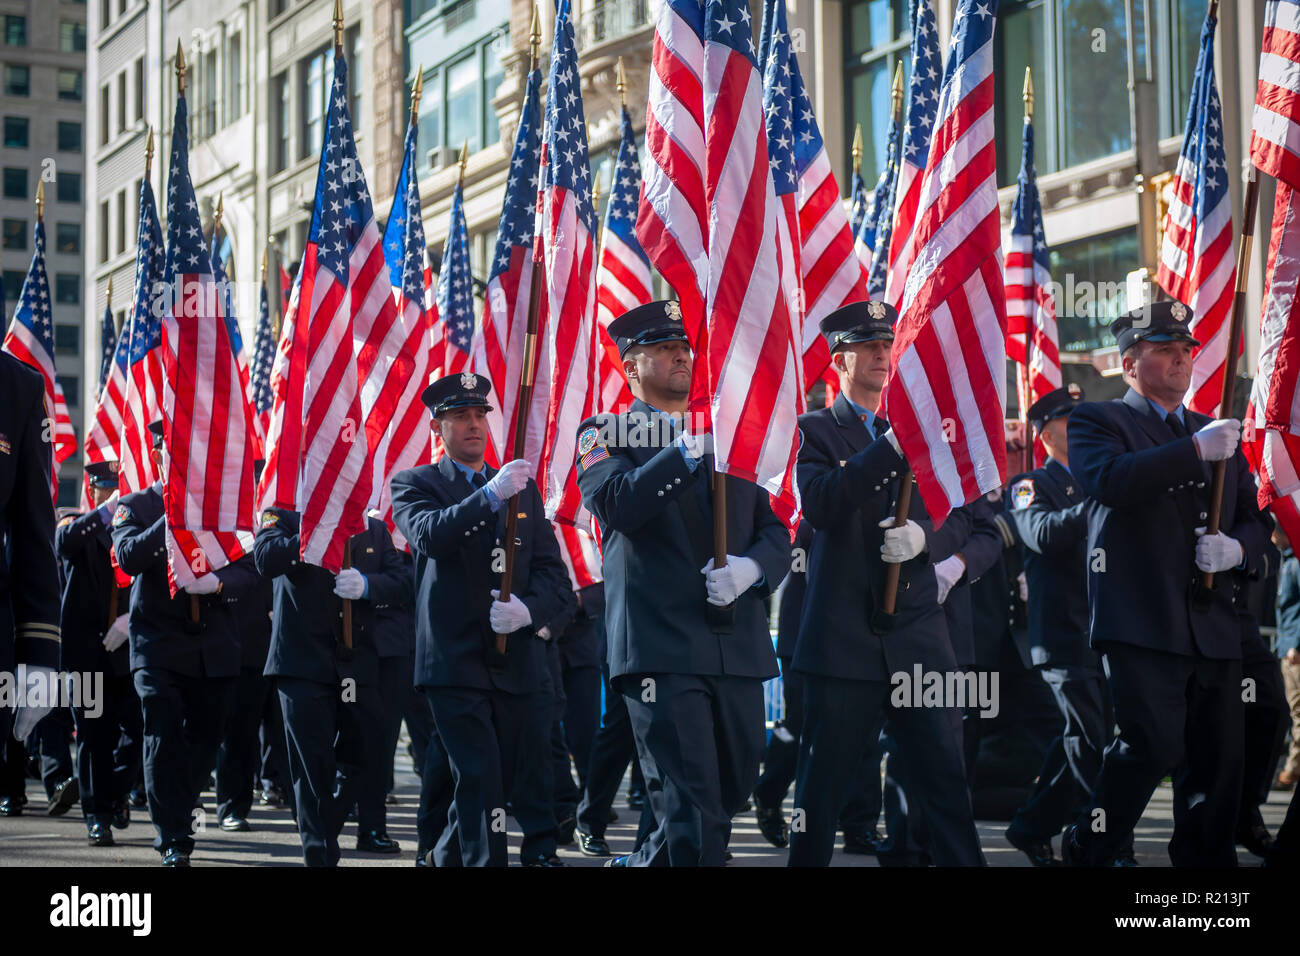 Members of the FDNY carry American flags on Fifth Avenue in New York during the Veterans Day Parade on Sunday, November 11, 2018.  Originally knows as Armistice Day, this year the holiday commemorates the 100th anniversary of the end of World War I. On the eleventh hour of the eleventh day of the eleventh month the guns fell silent in 1918 marking the end of World War I.  The holiday has been expanded to include all American soldiers from all wars. (Â© Richard B. Levine) Stock Photo